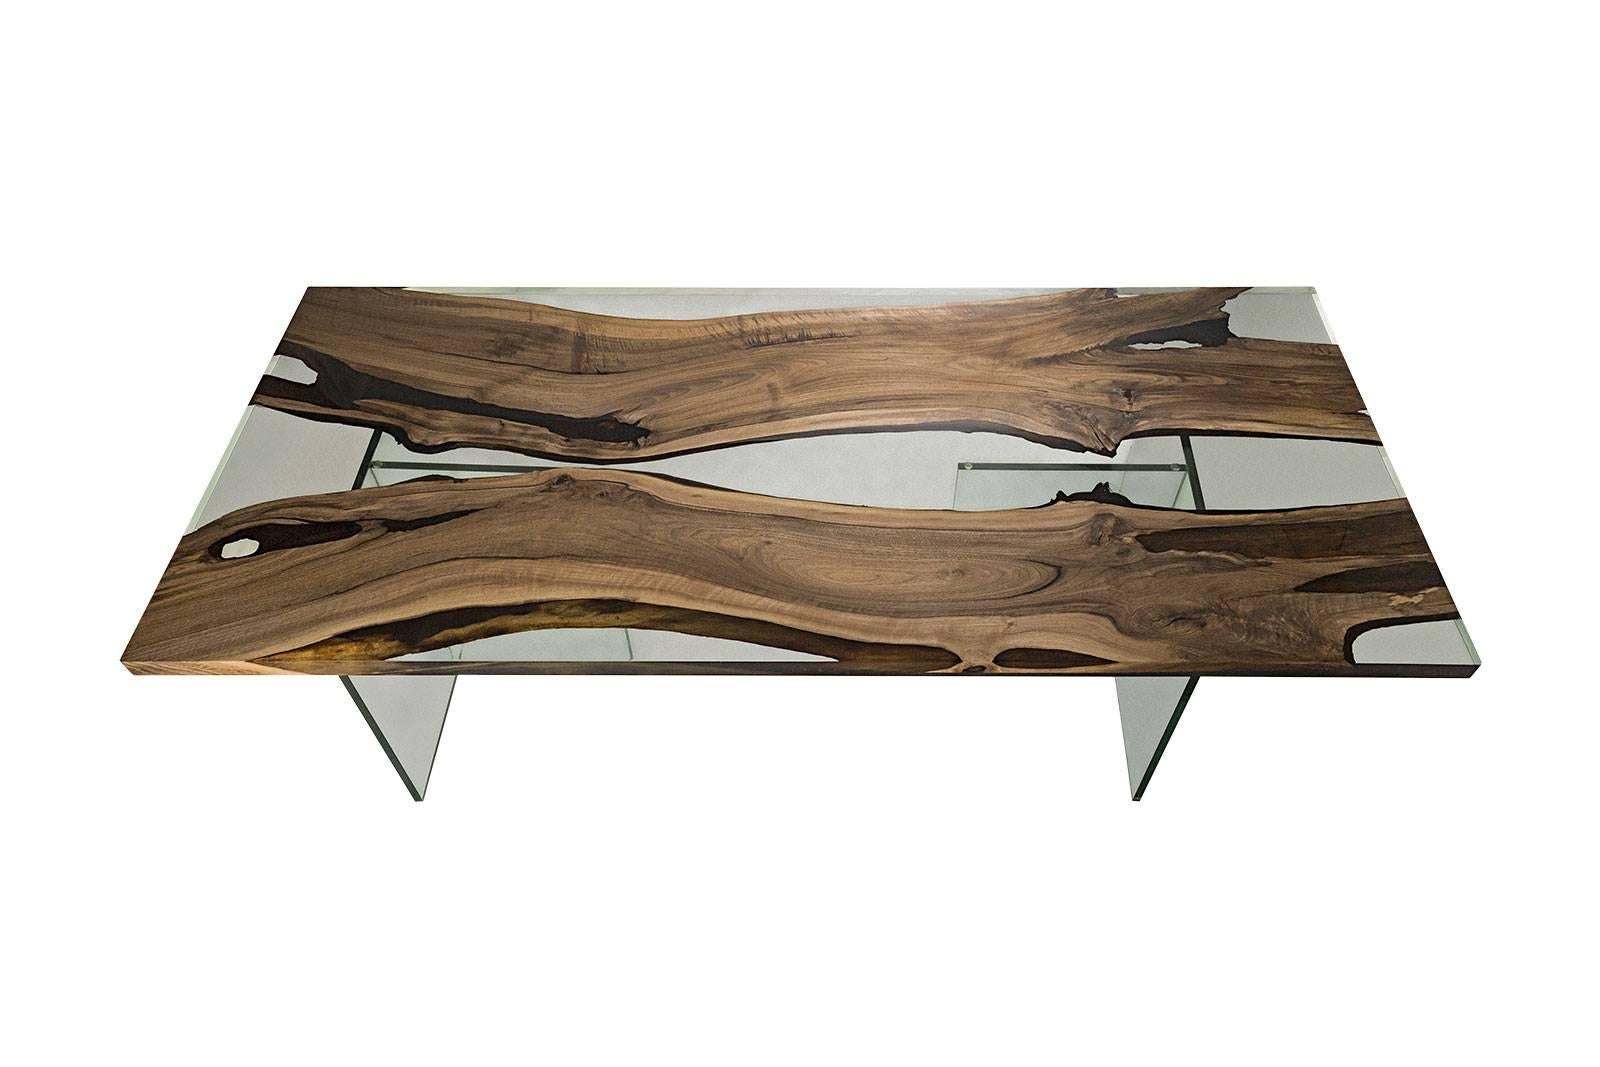 The ‘Hudson 250 Resin Dining Table’ was made in Ankara, Turkey with walnut wood. The wood is kilned and dried prior to being filled with high quality resin and has cast iron geometric legs. Its edges are straight cut to show the depth of the wood